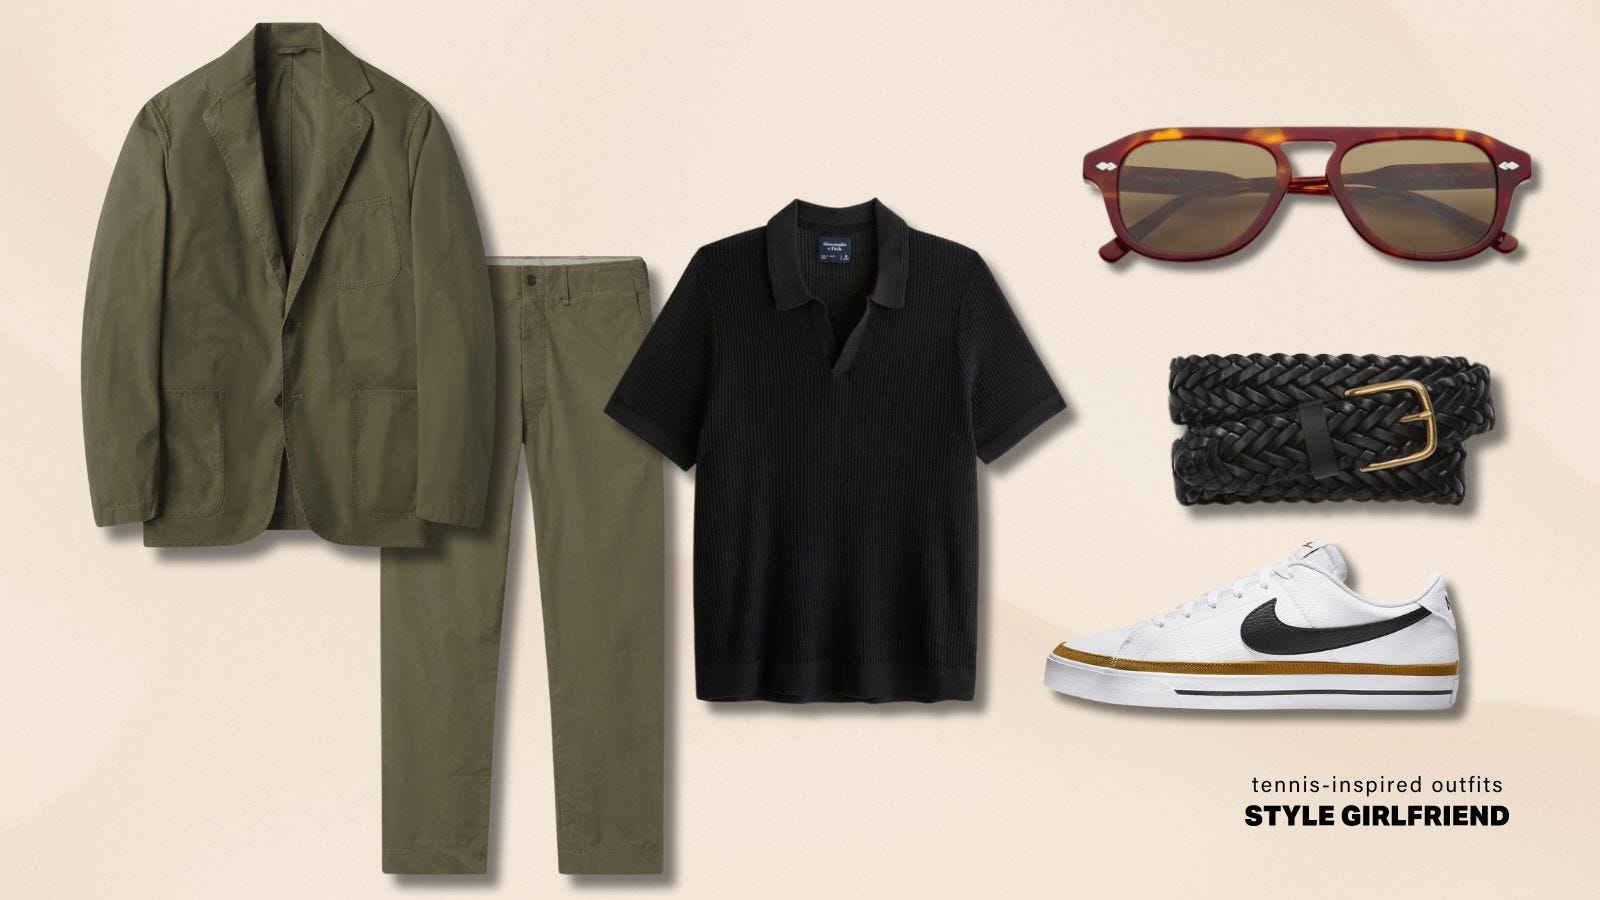 Flat lay image of casual men's suit with black knitted polo shirt, sunglasses, braided belt and white tennis shoes